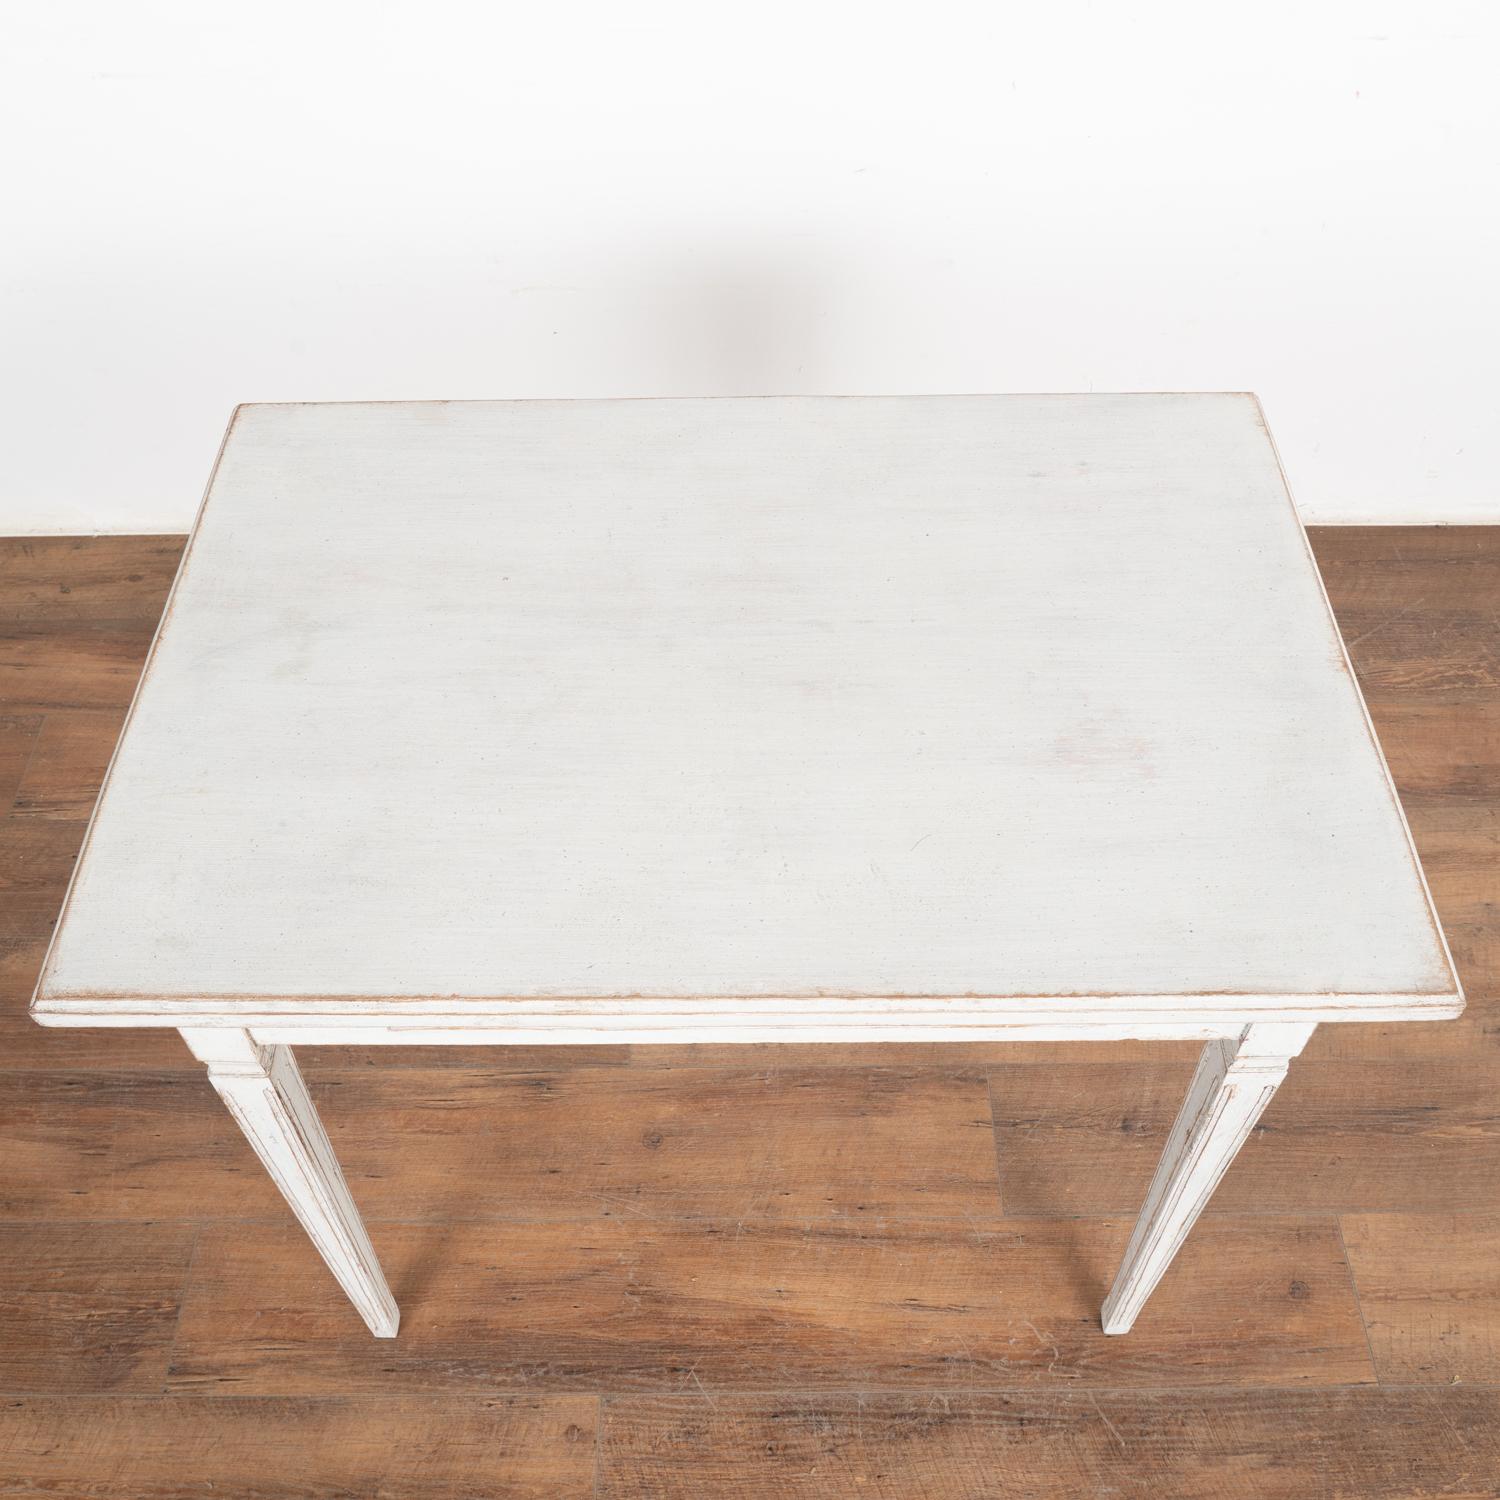 Wood Antique Swedish Gustavian White Painted Side Table With Drawer, circa 1860-80 For Sale